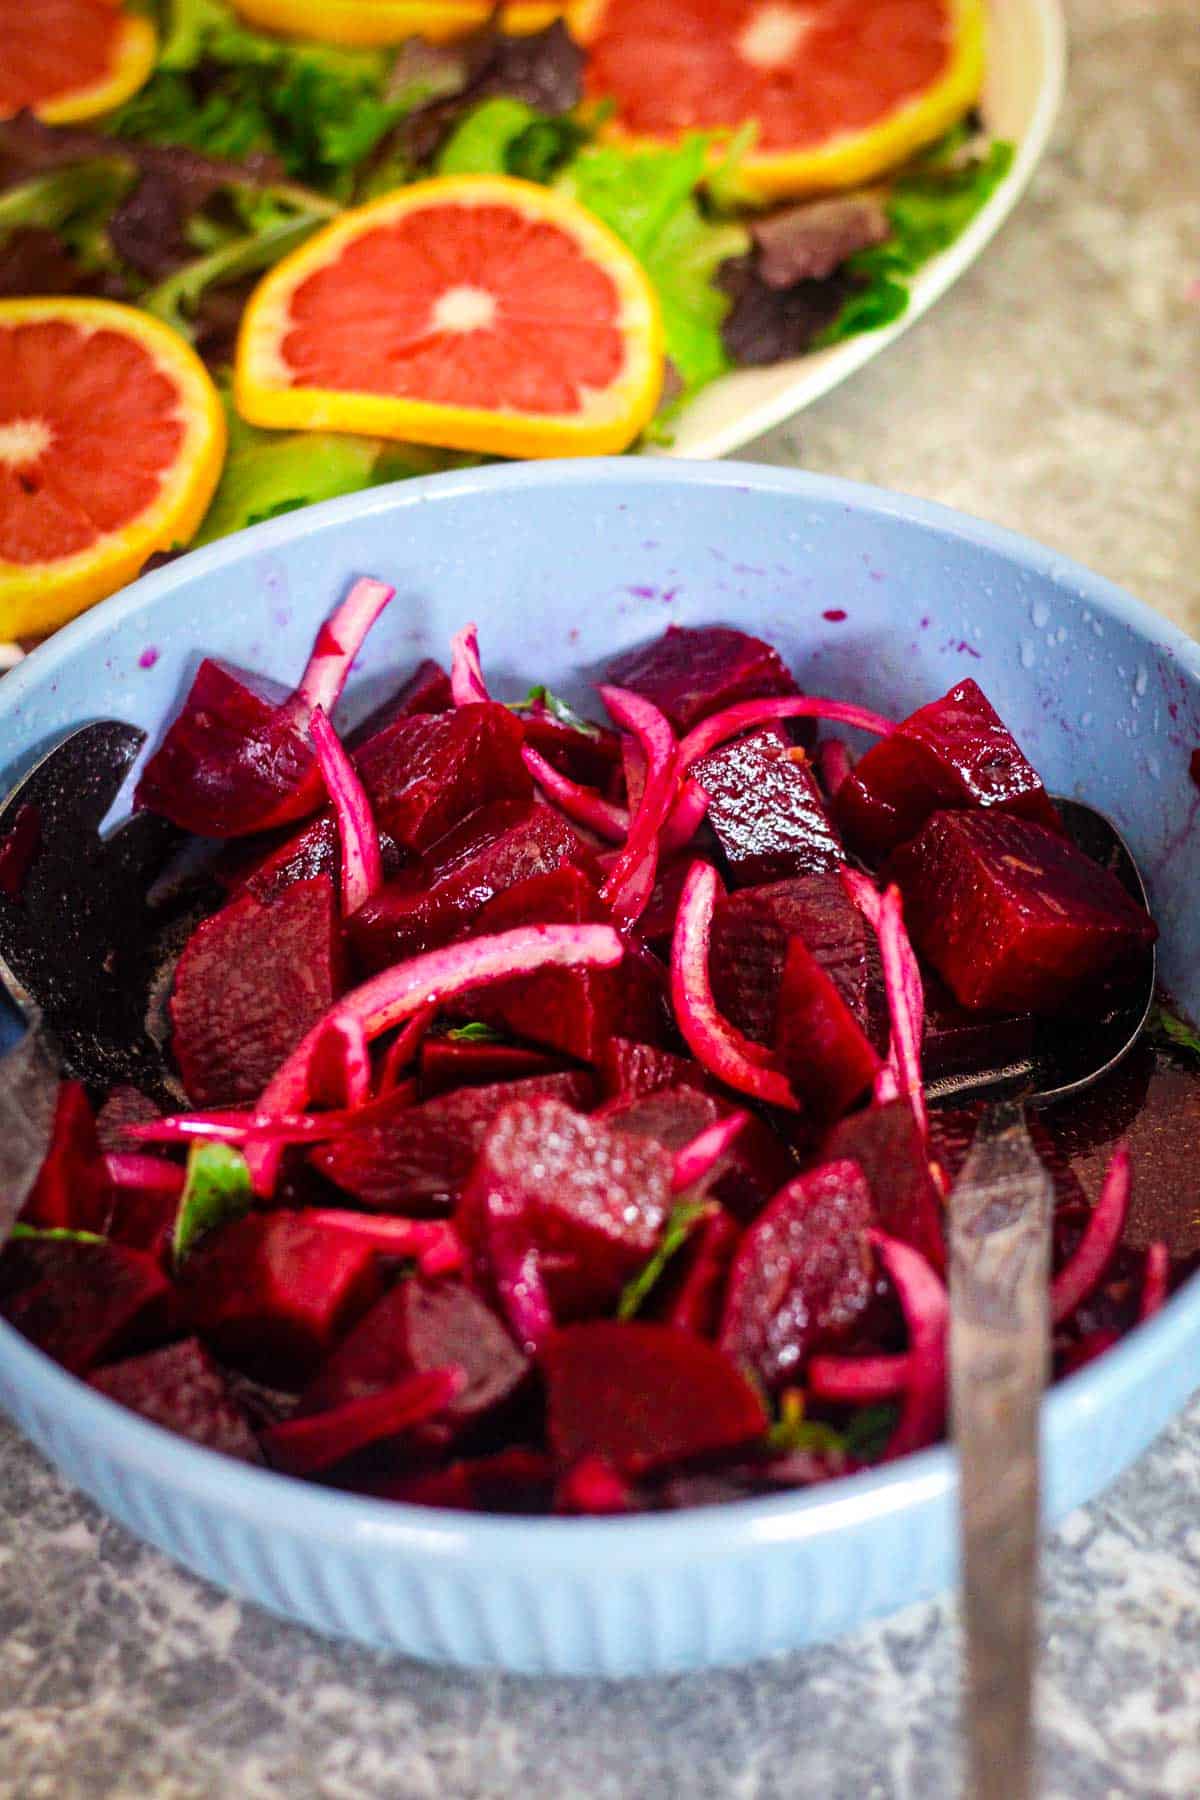 Beets, onions, mint mixed with vinaigrette so now everything is reddish in color and well coated with the vinaigrette, it's almost like a marinade. 